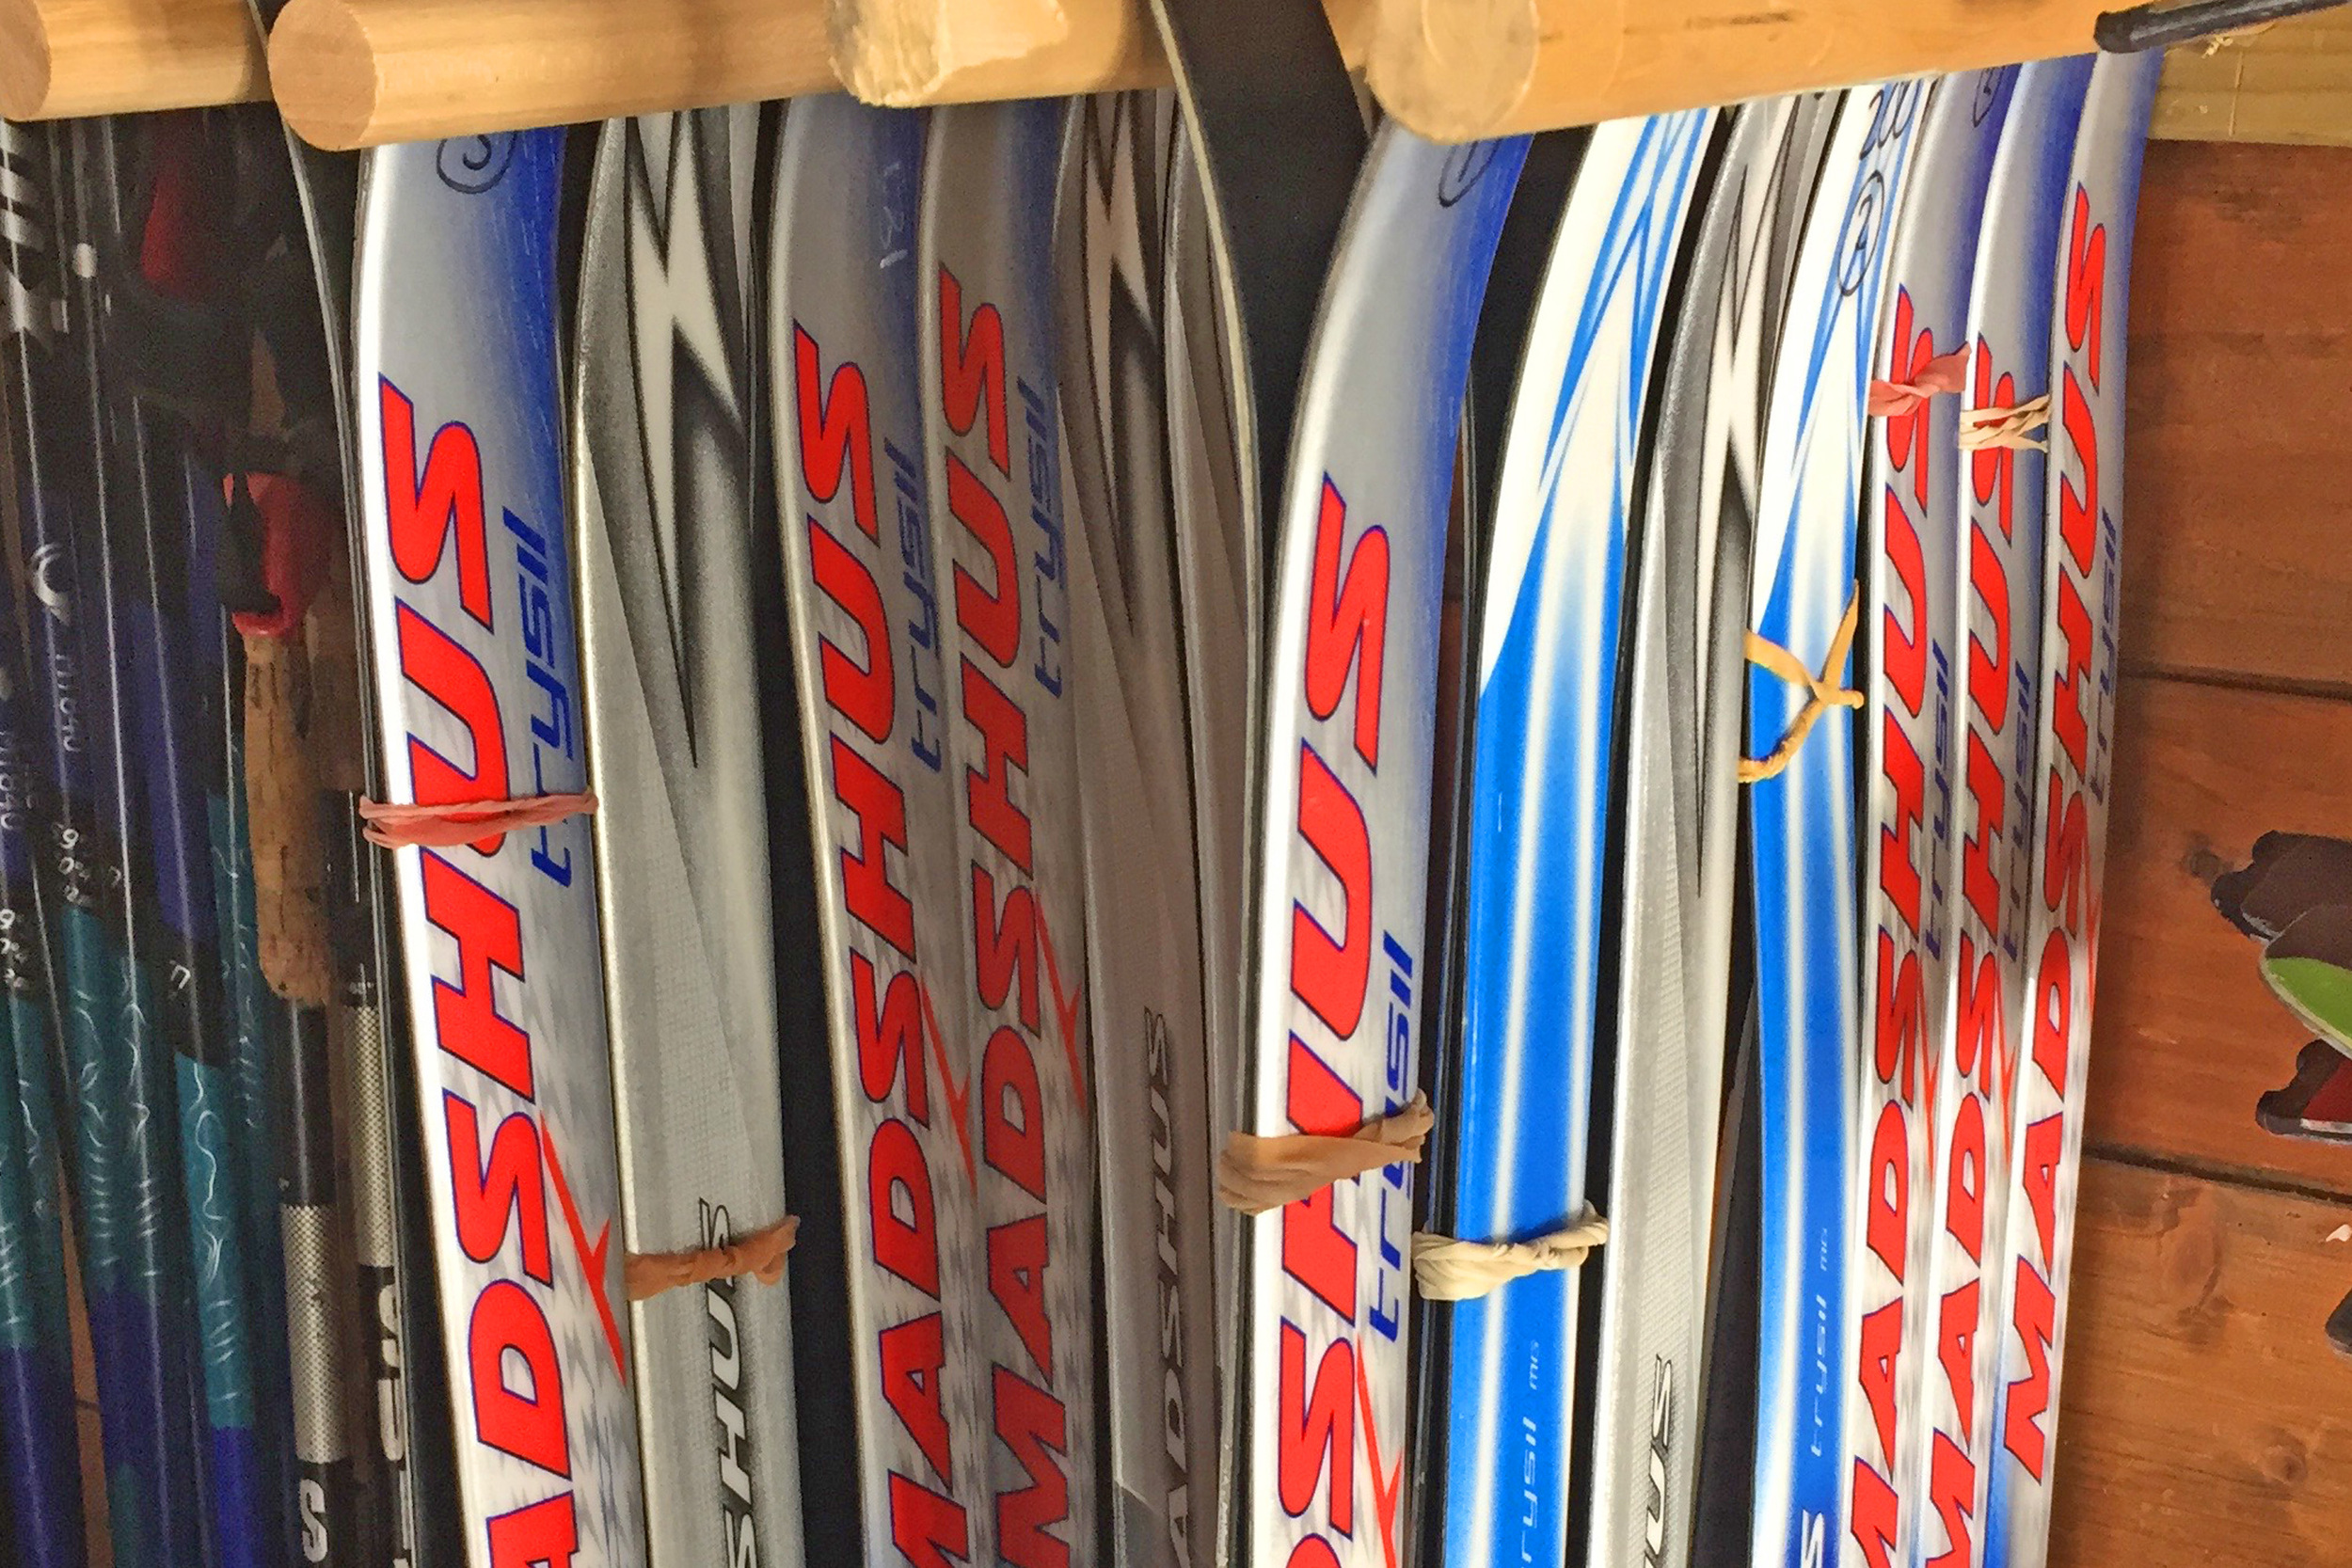  Cross Country - Nordic Track Skis. 